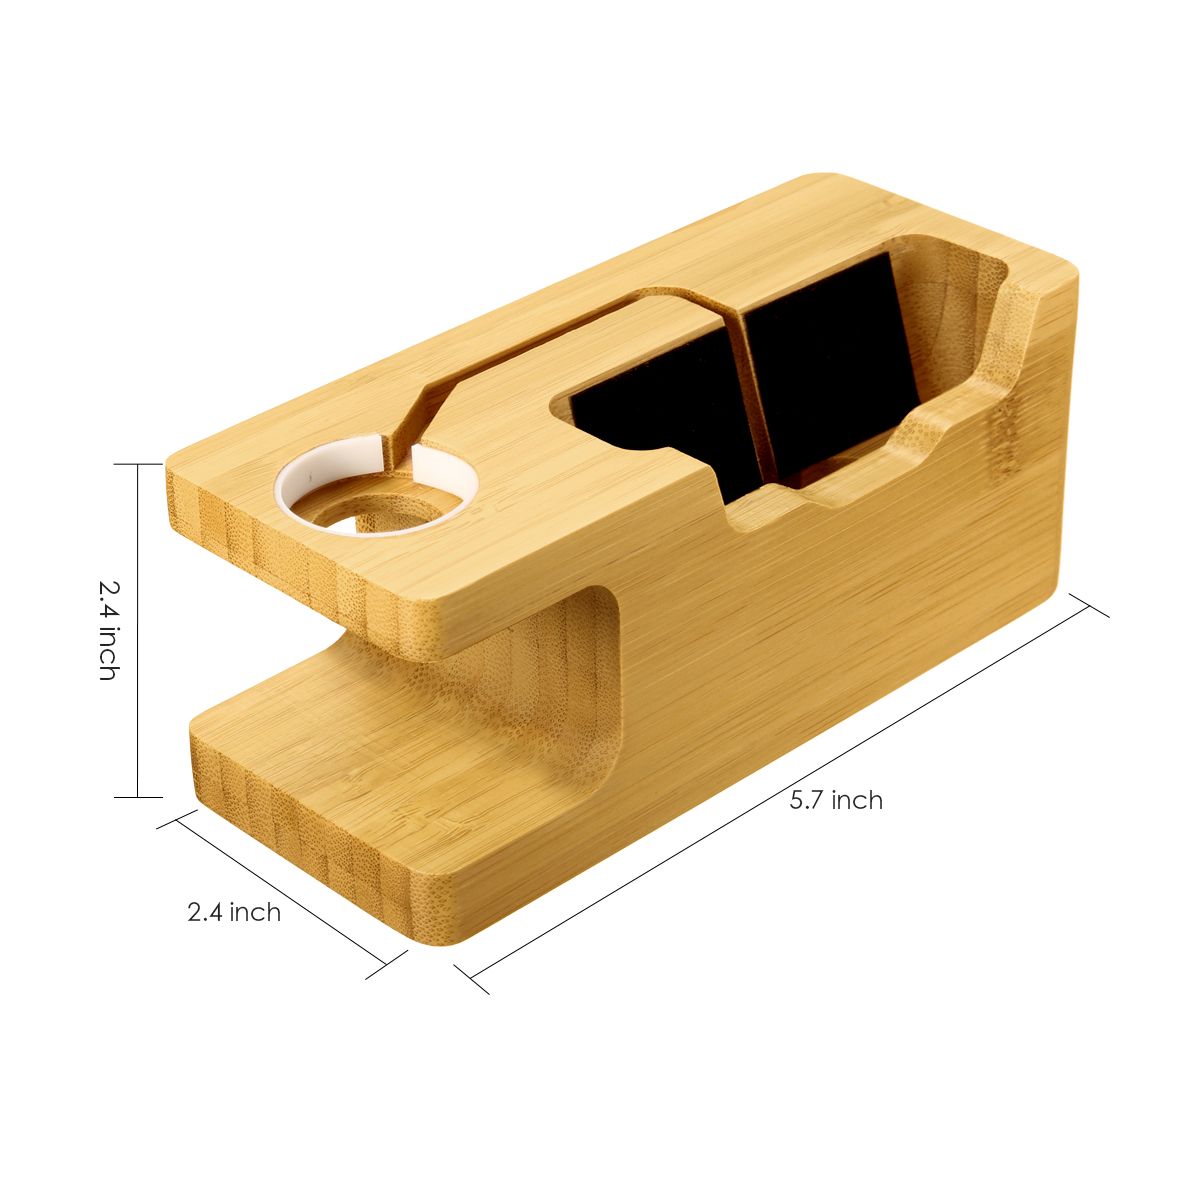 Bakeey-3-USB-Port-Bamboo-Wood-Charging-Dock-Station-Phone-Holder-for-38mm-and-42mm-Smartphone-1657703